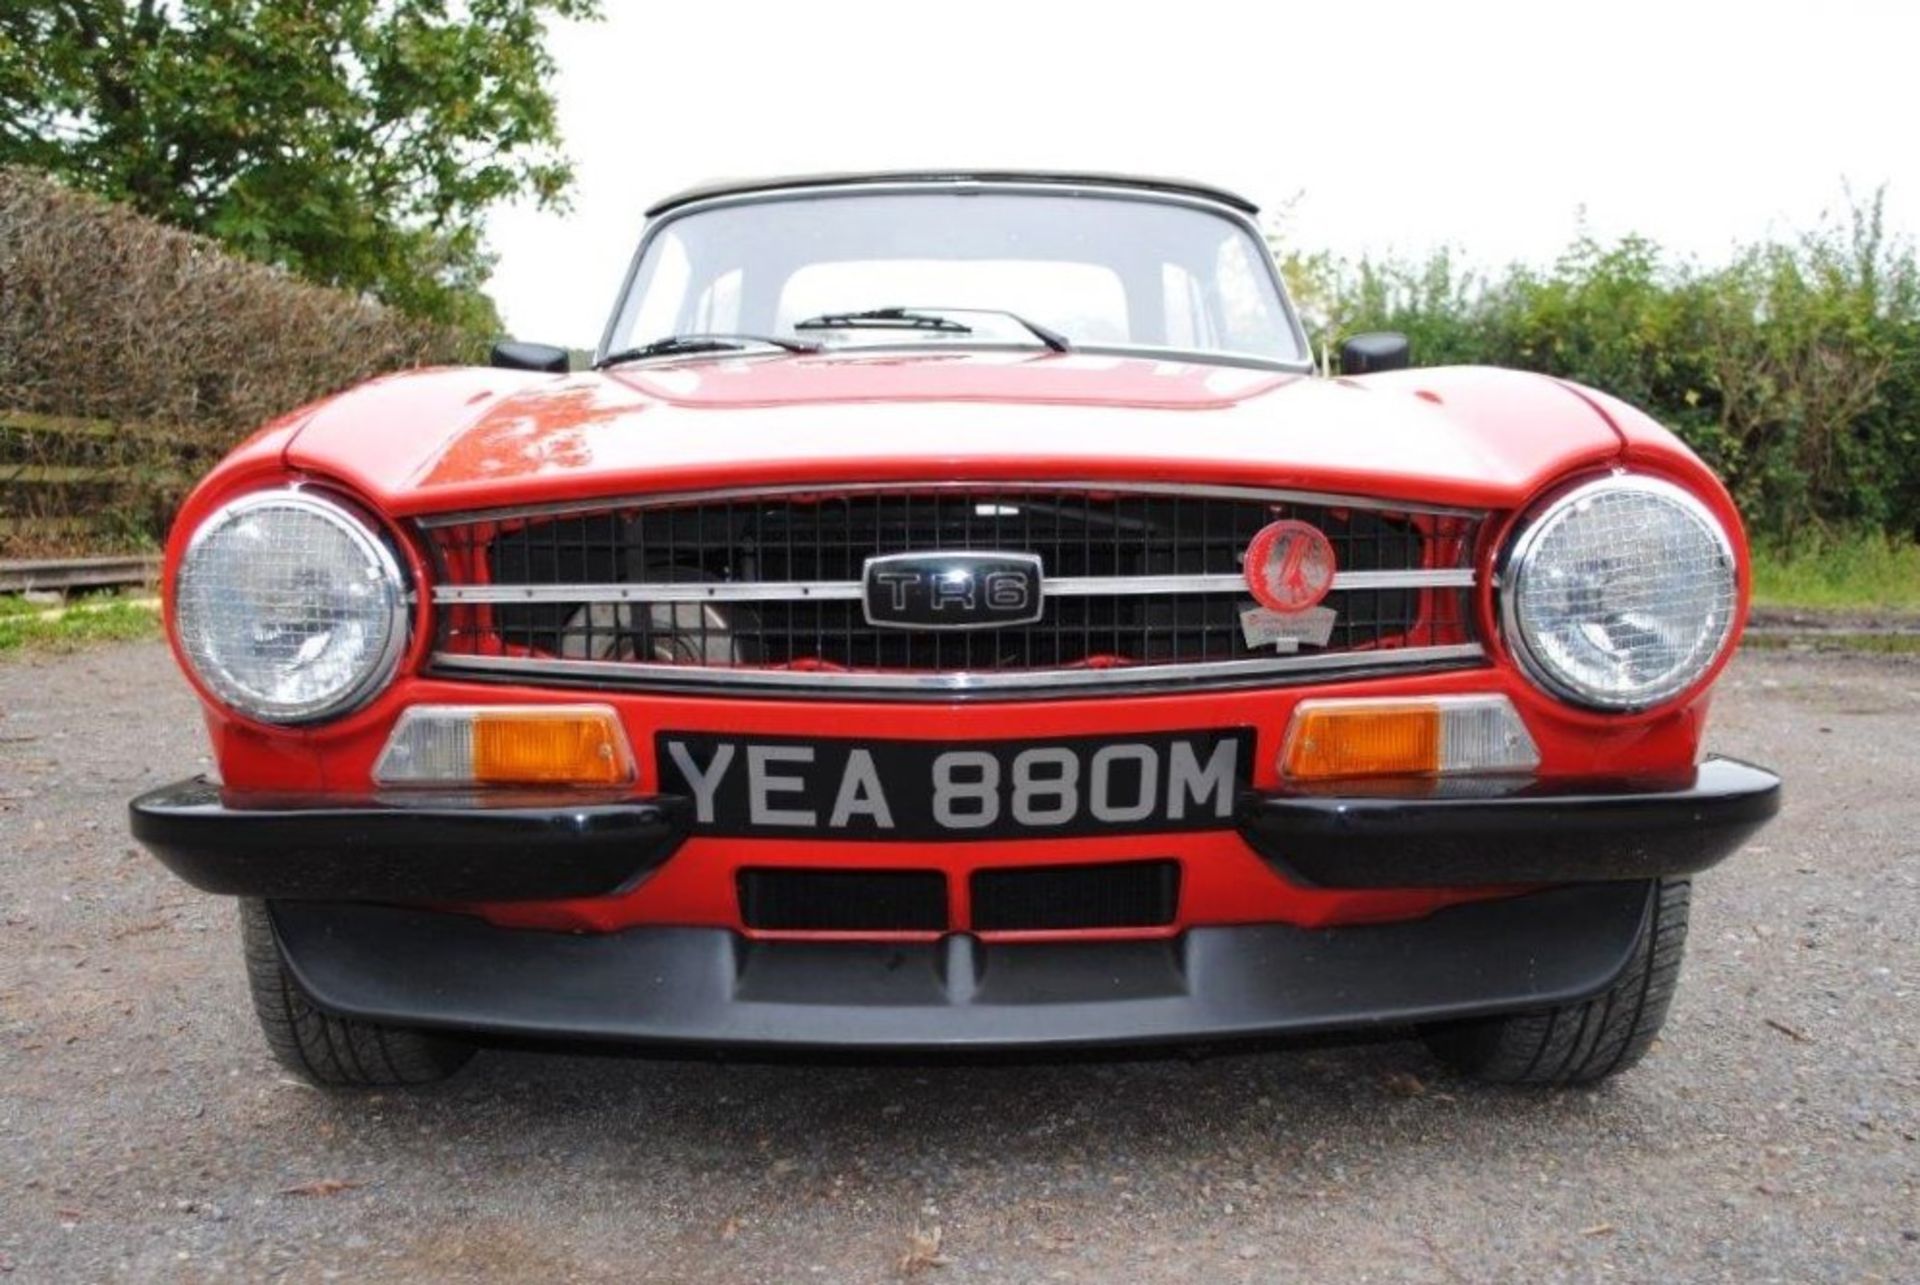 1974 TRIUMPH TR6 Registration Number: YEA 880M Chassis Number: CR51799 Recorded Mileage: 93,000 - Image 6 of 26